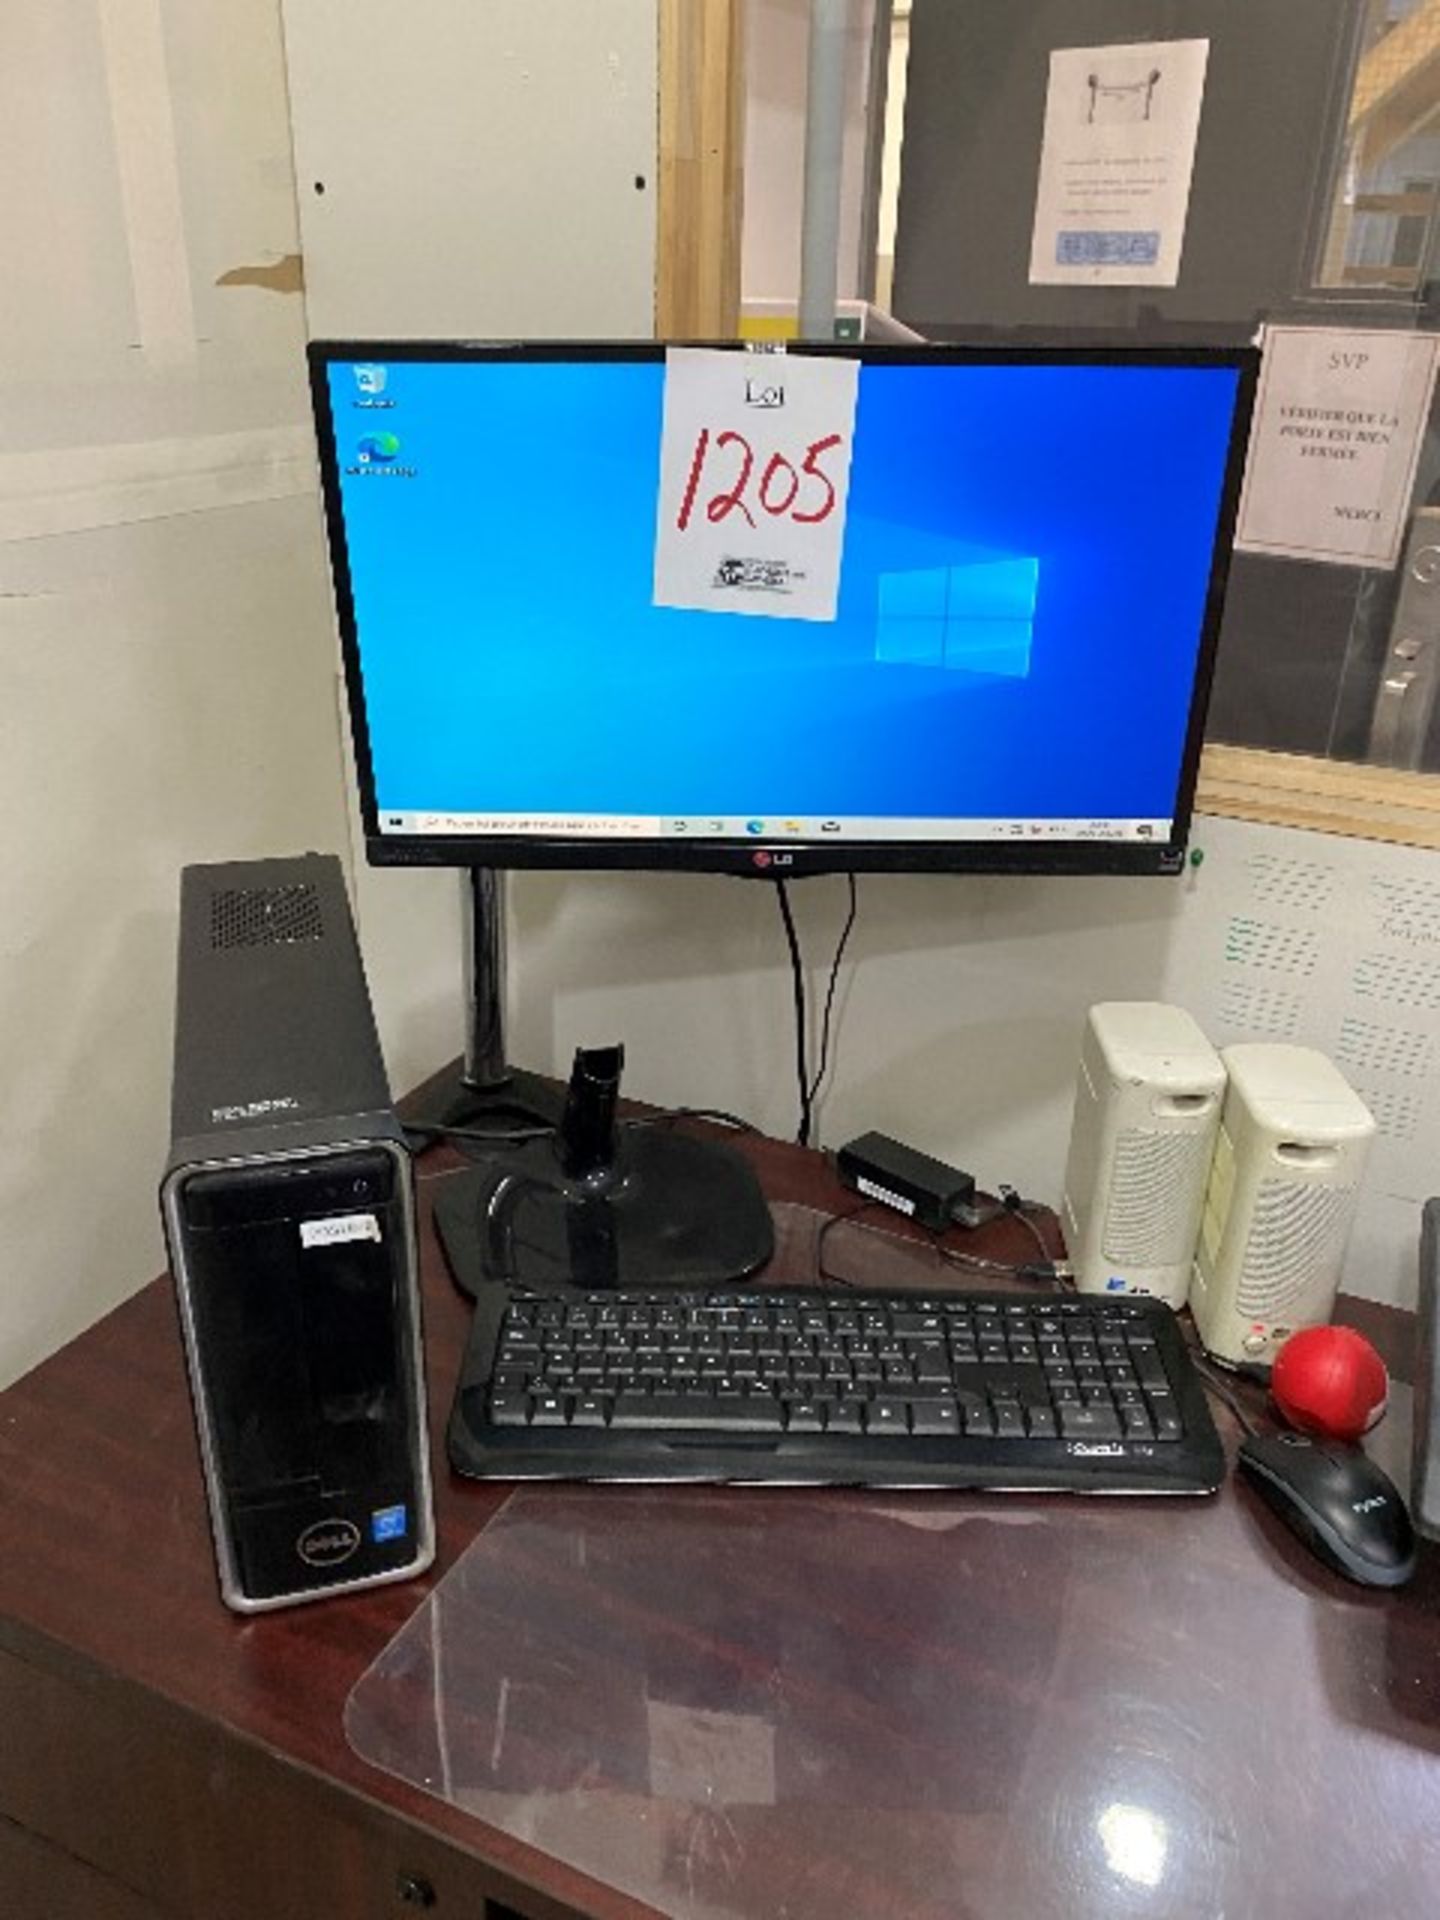 Dell System Core i3,3.50GHz,4GB RAM,1TB HDD,keyboard,mouse,speakers